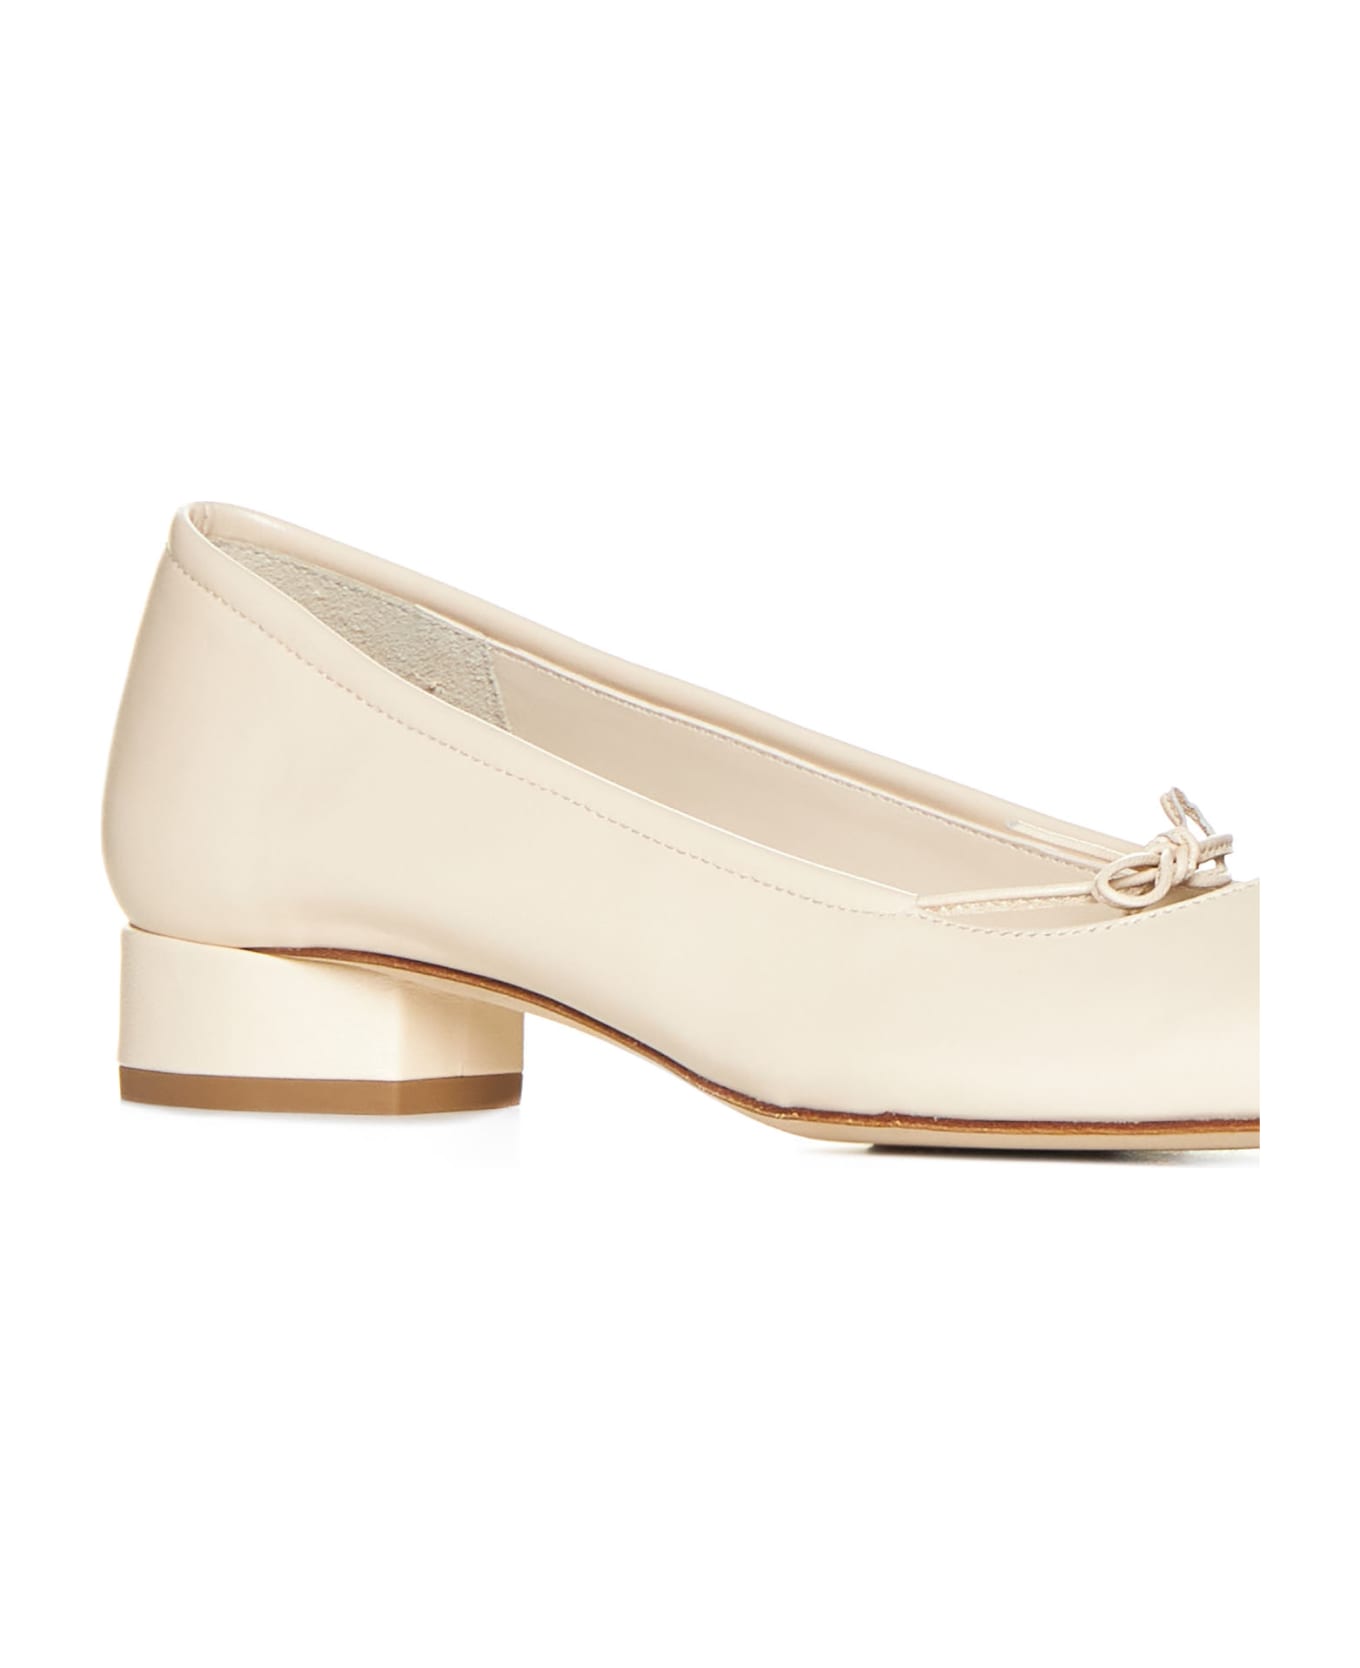 aeyde Flat Shoes - Creamy